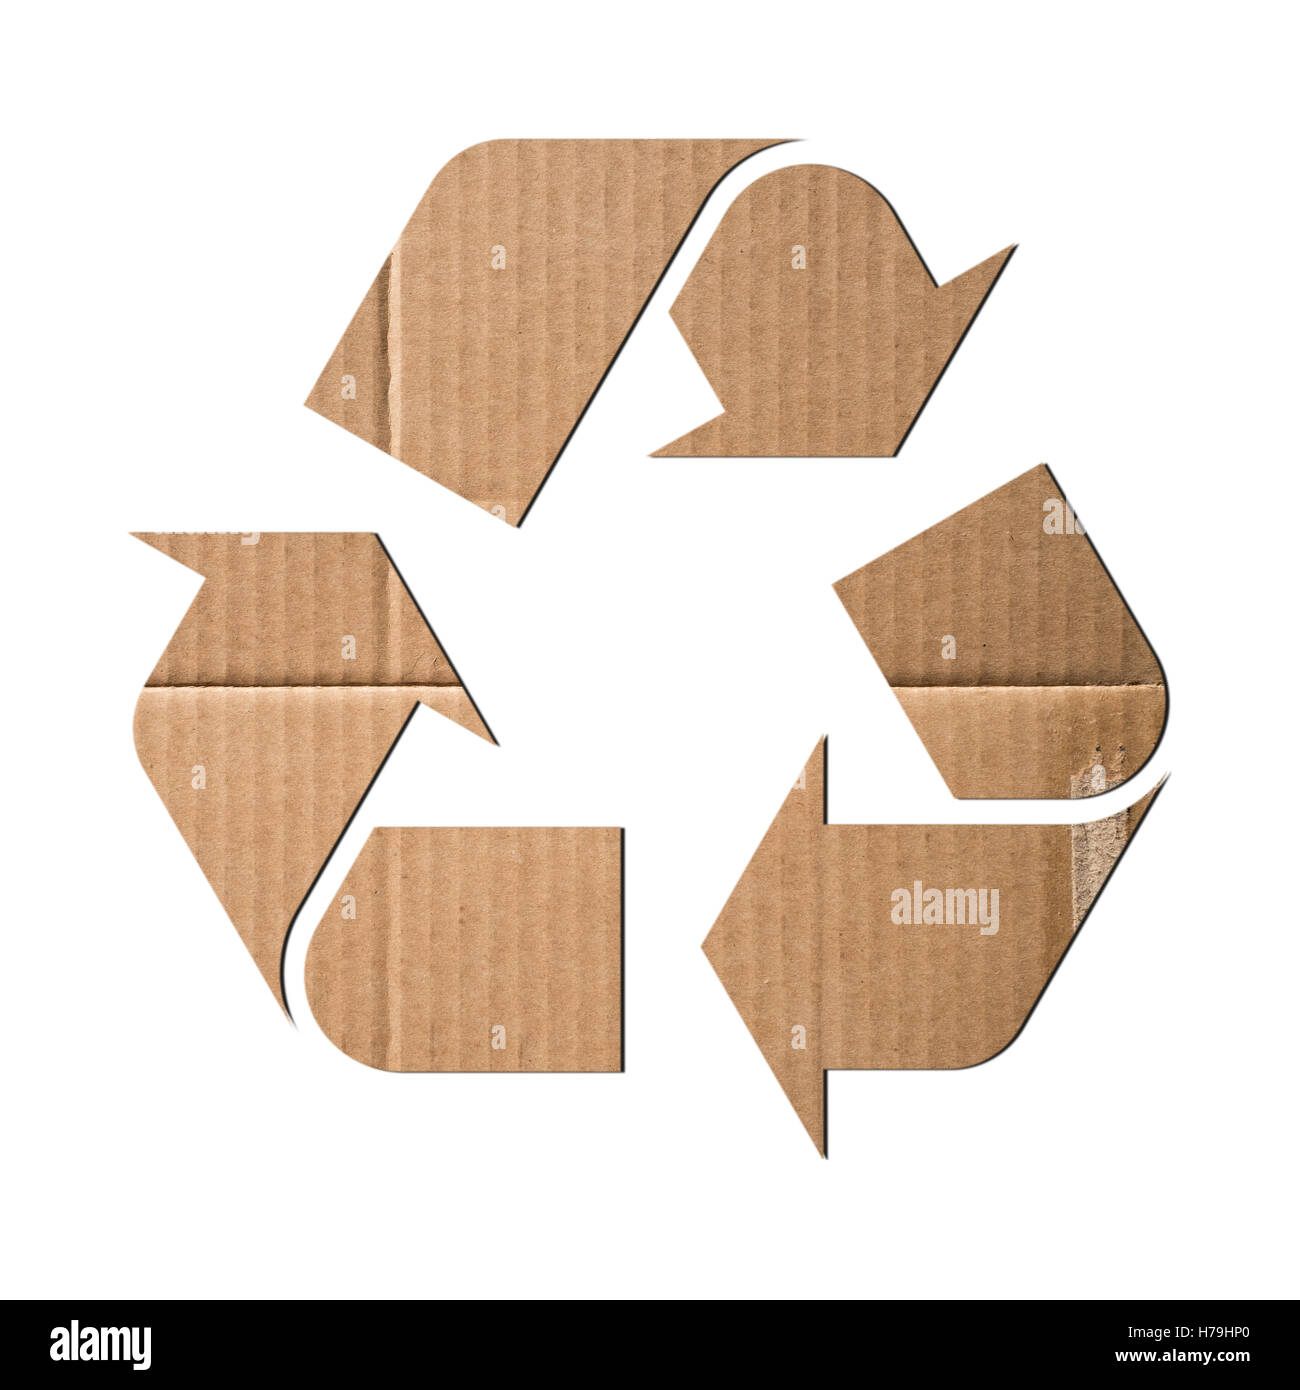 Recycling symbol made of corrugated cardboard Stock Photo